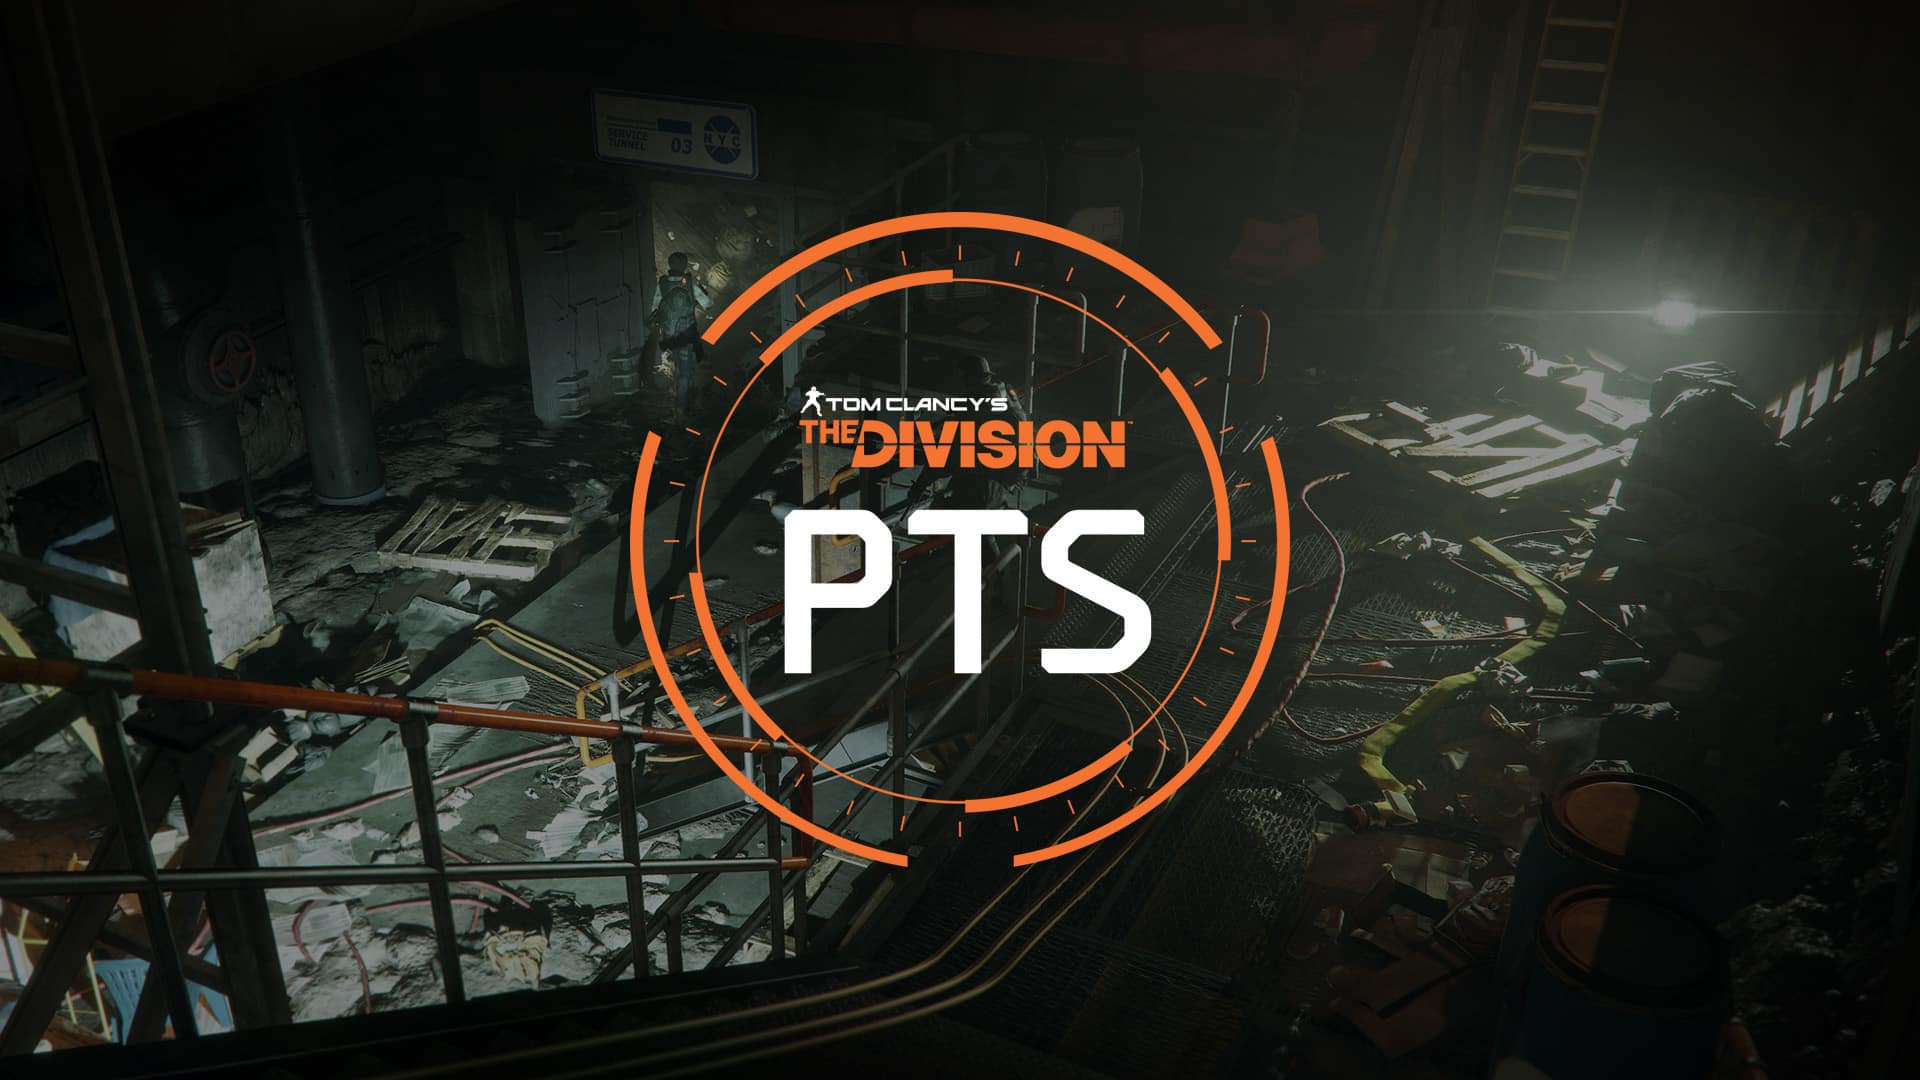 The Division Pts 17 Build 3 Is Now Live Patch Notes Are Revealed